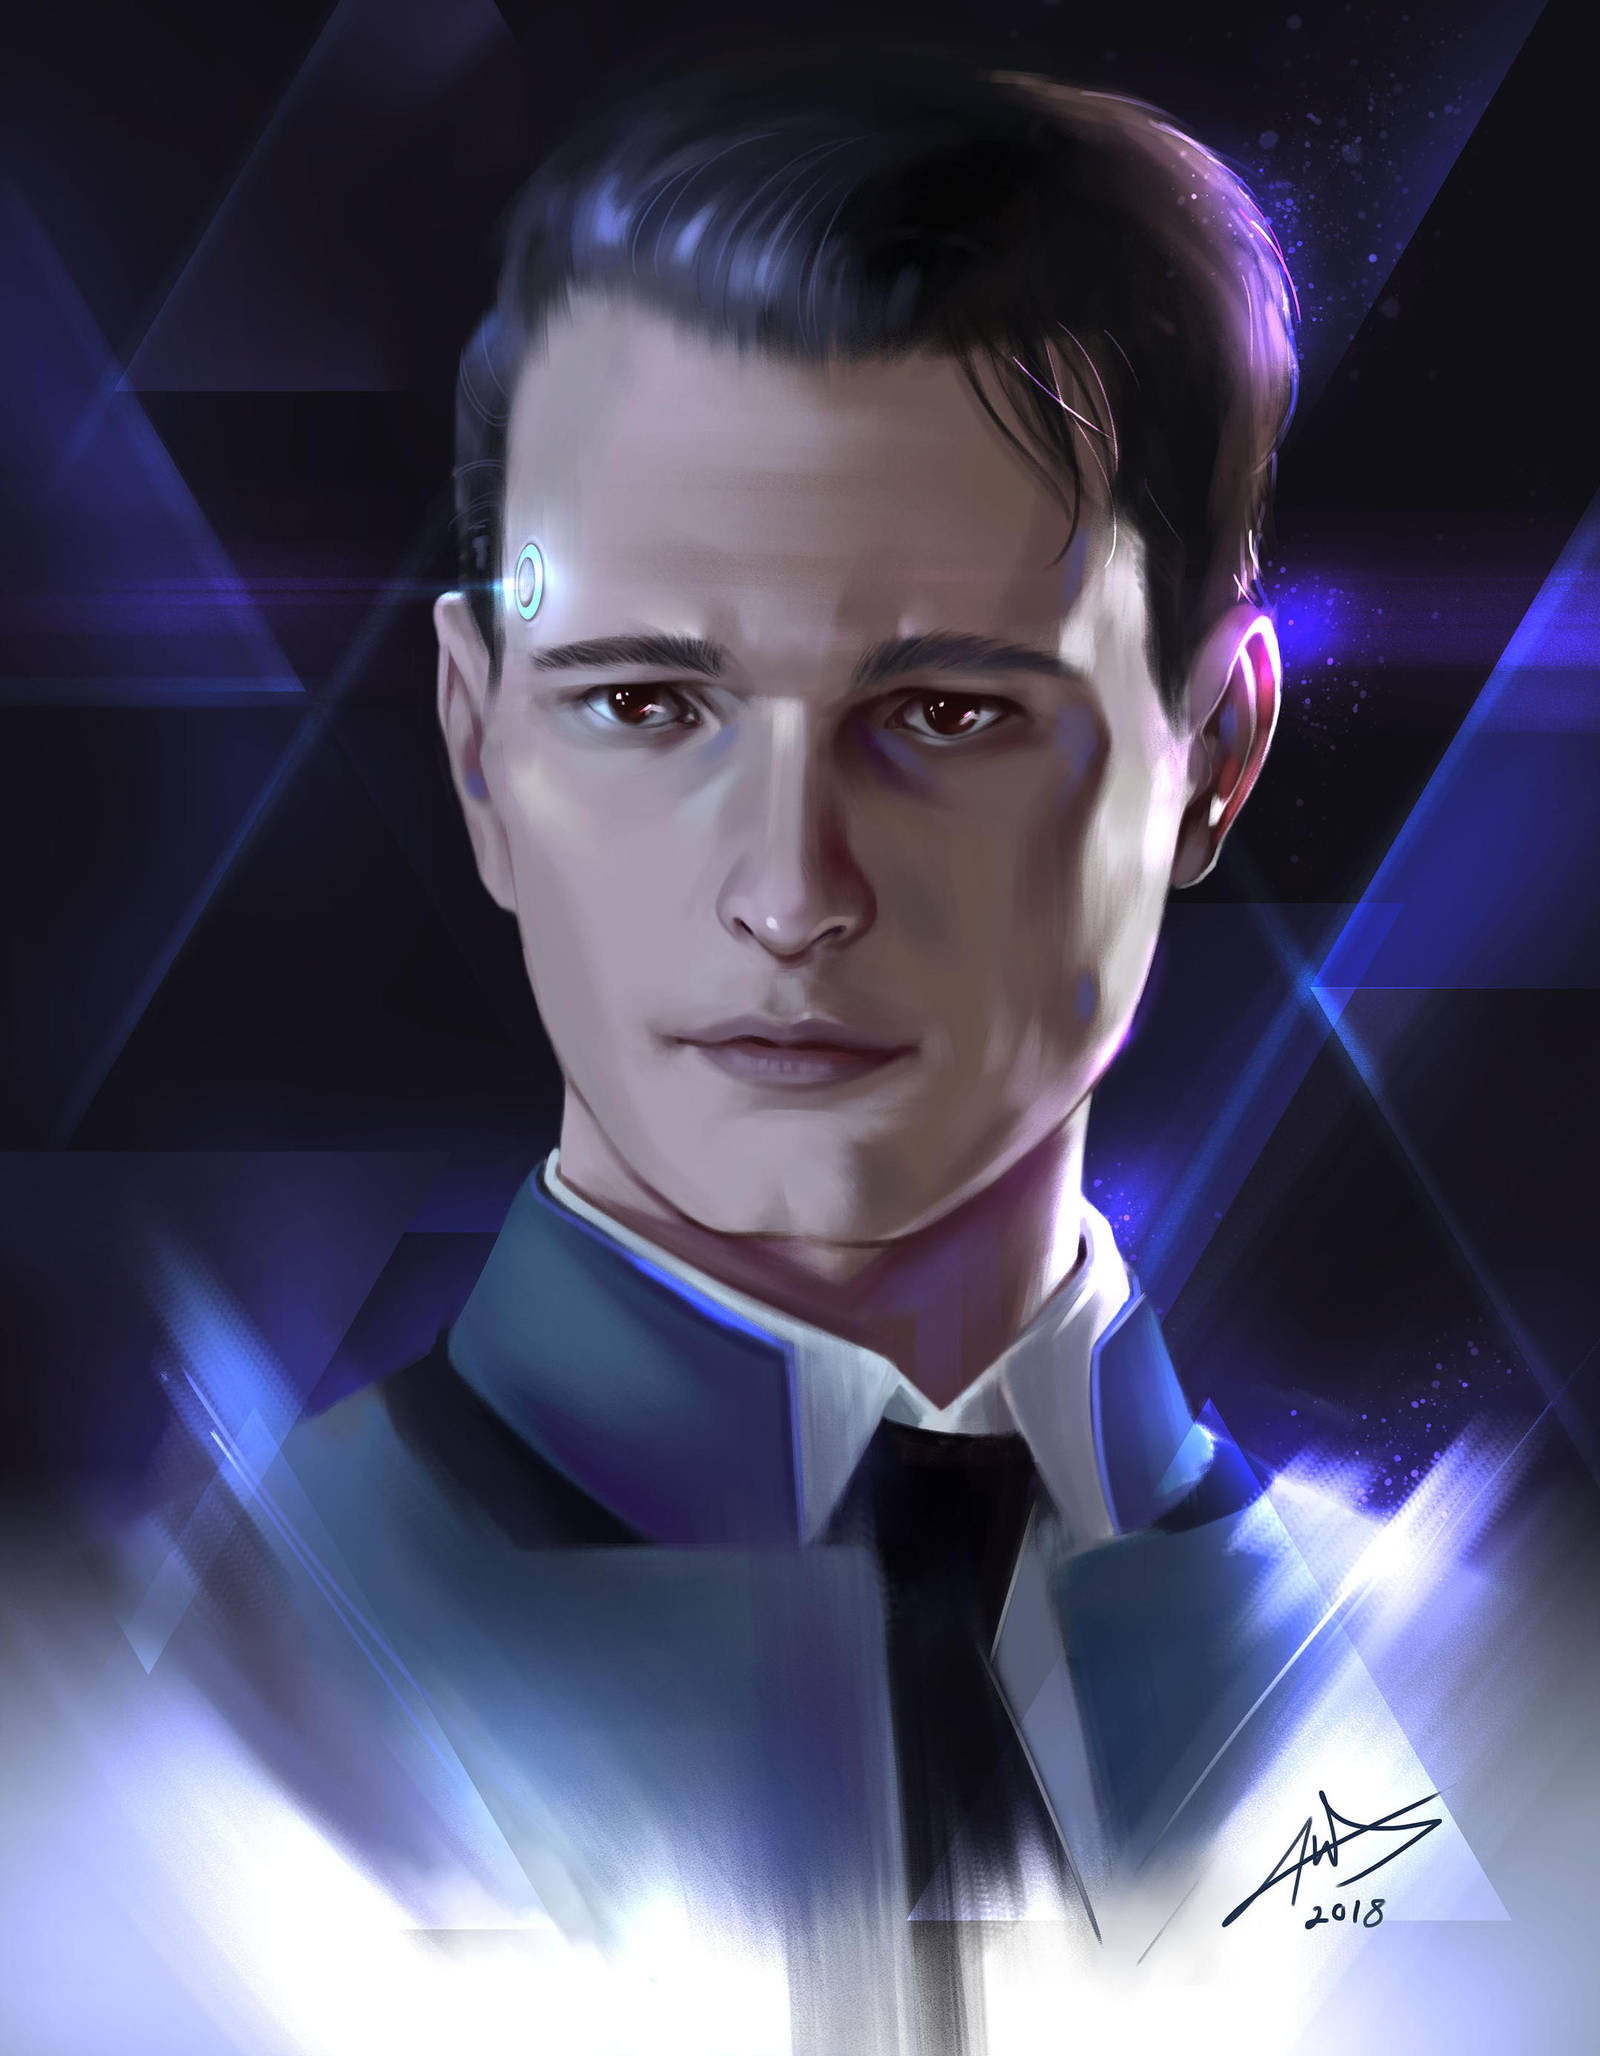 Detroit Become Human - Connor by chuaenghan on DeviantArt